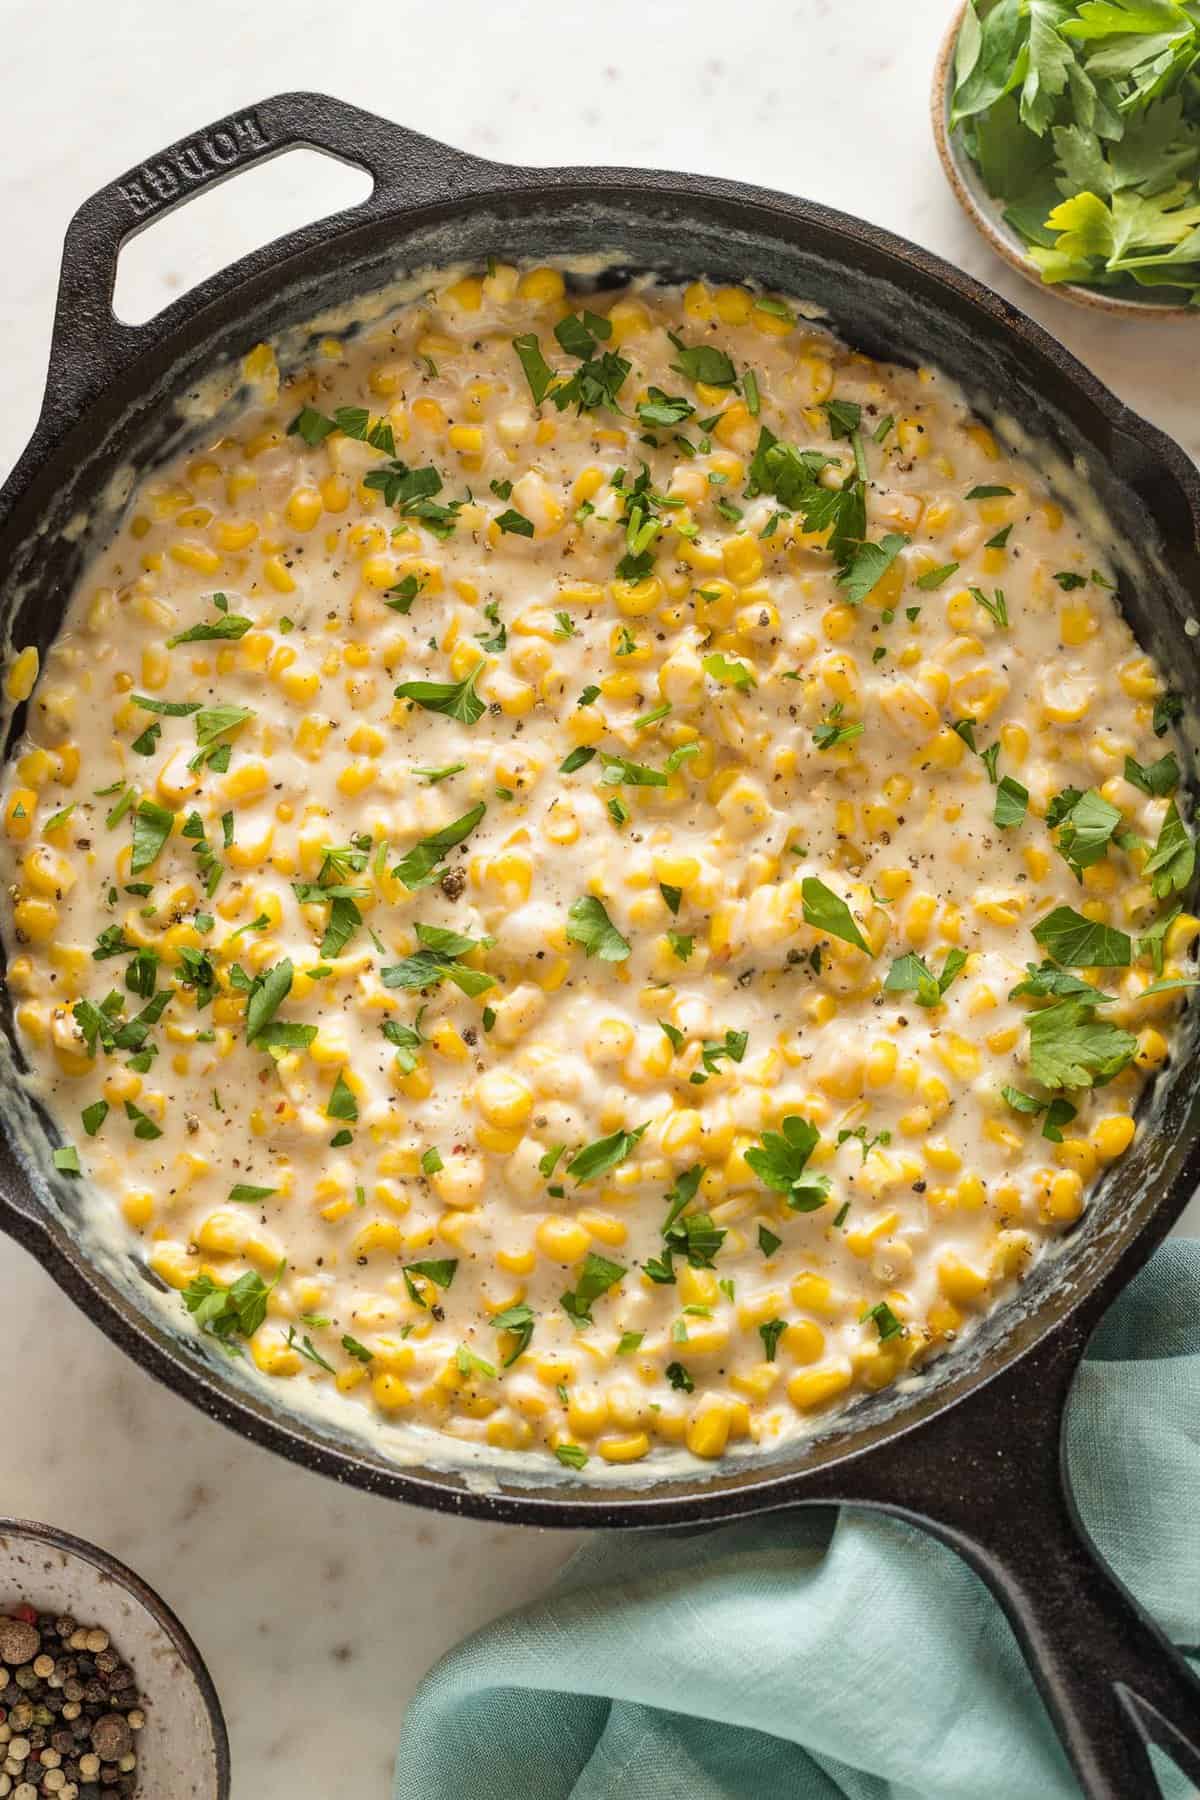 Creamed corn in a cast iron skillet with parsley leaves on top under a teal napkin